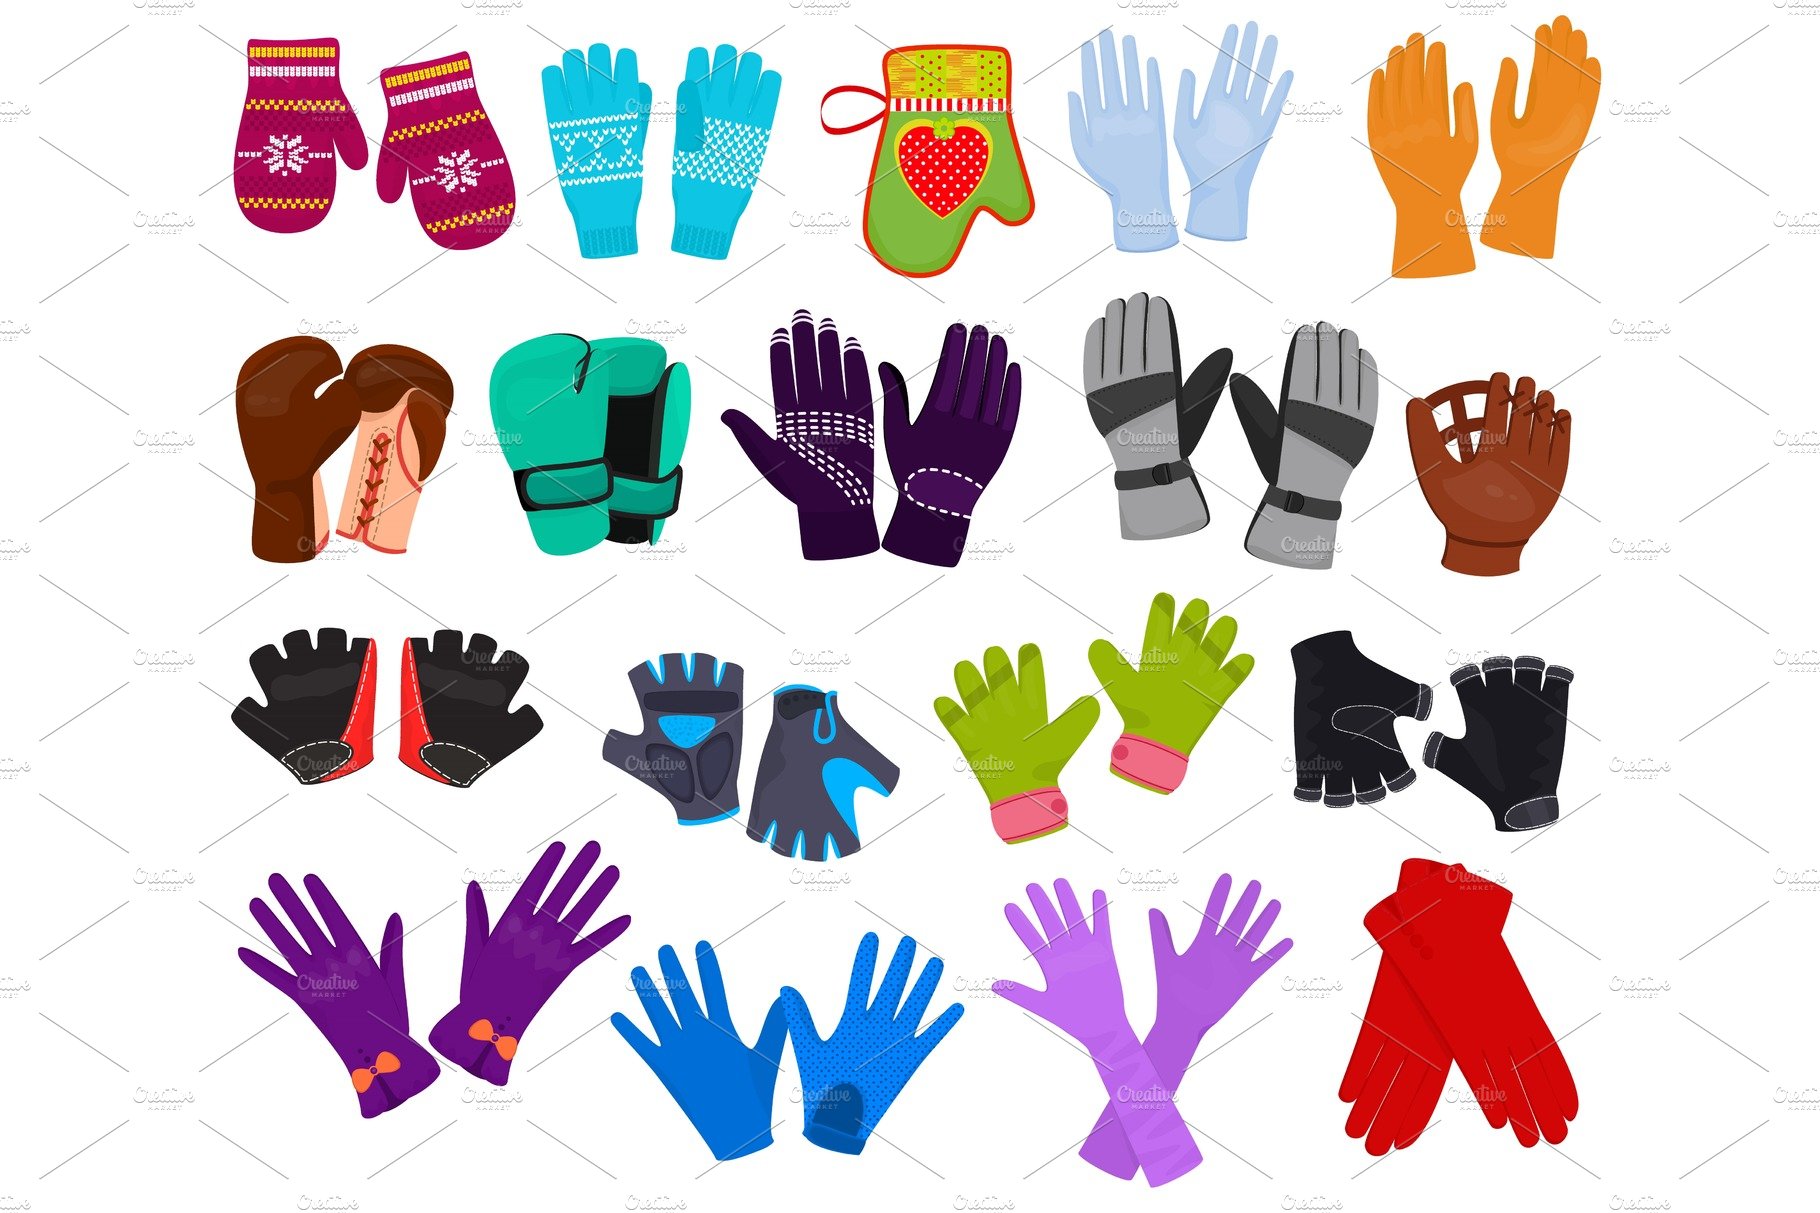 Glove vector woolen xmas mittens and cover image.